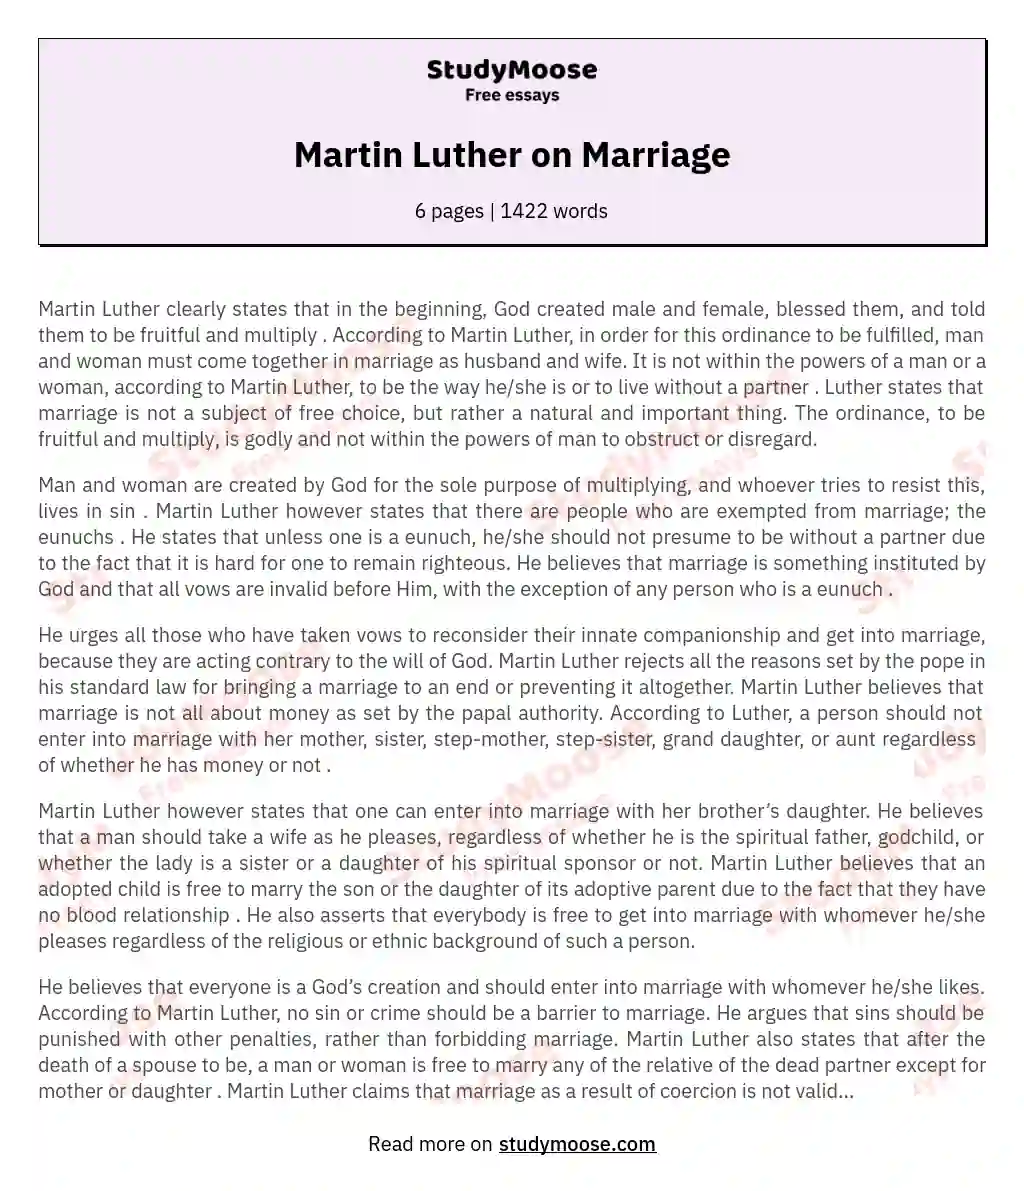 Martin Luther on Marriage essay